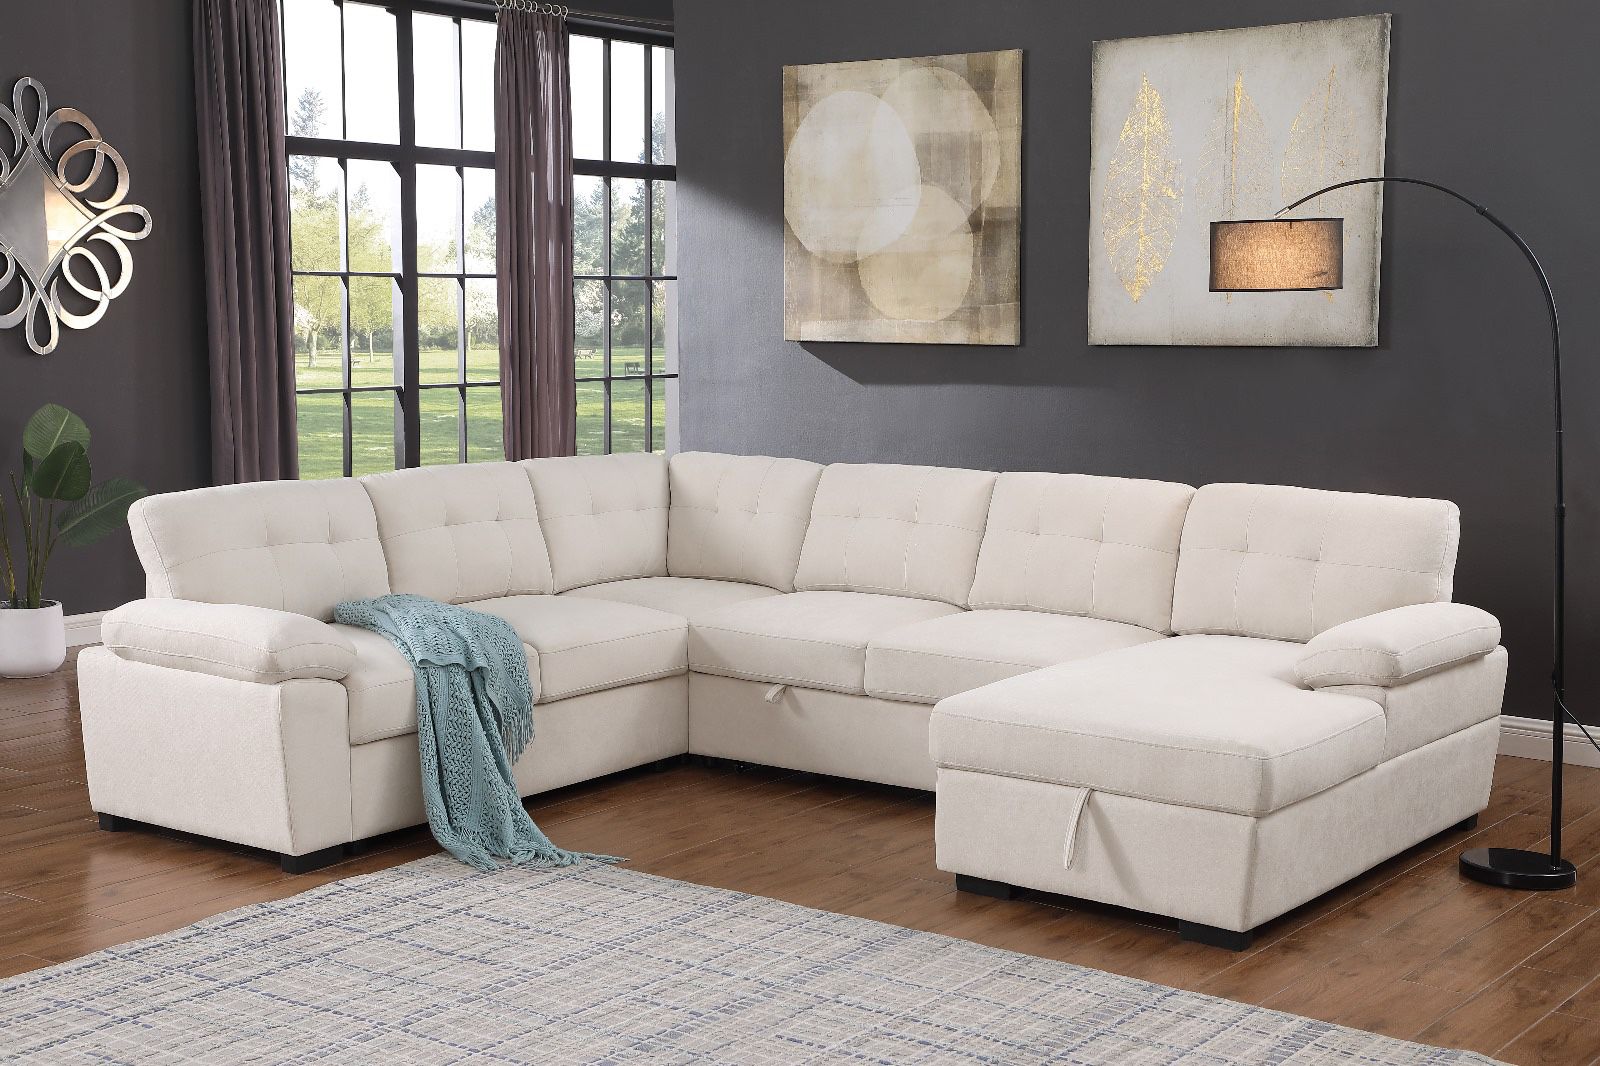 !!New! Soft Durable Large U-shaped Sectional Sofa With Pull Be Out, Sofa Bed, Large Pull Out Bed Sofa, Sectional, Sectional Couch, Sofa